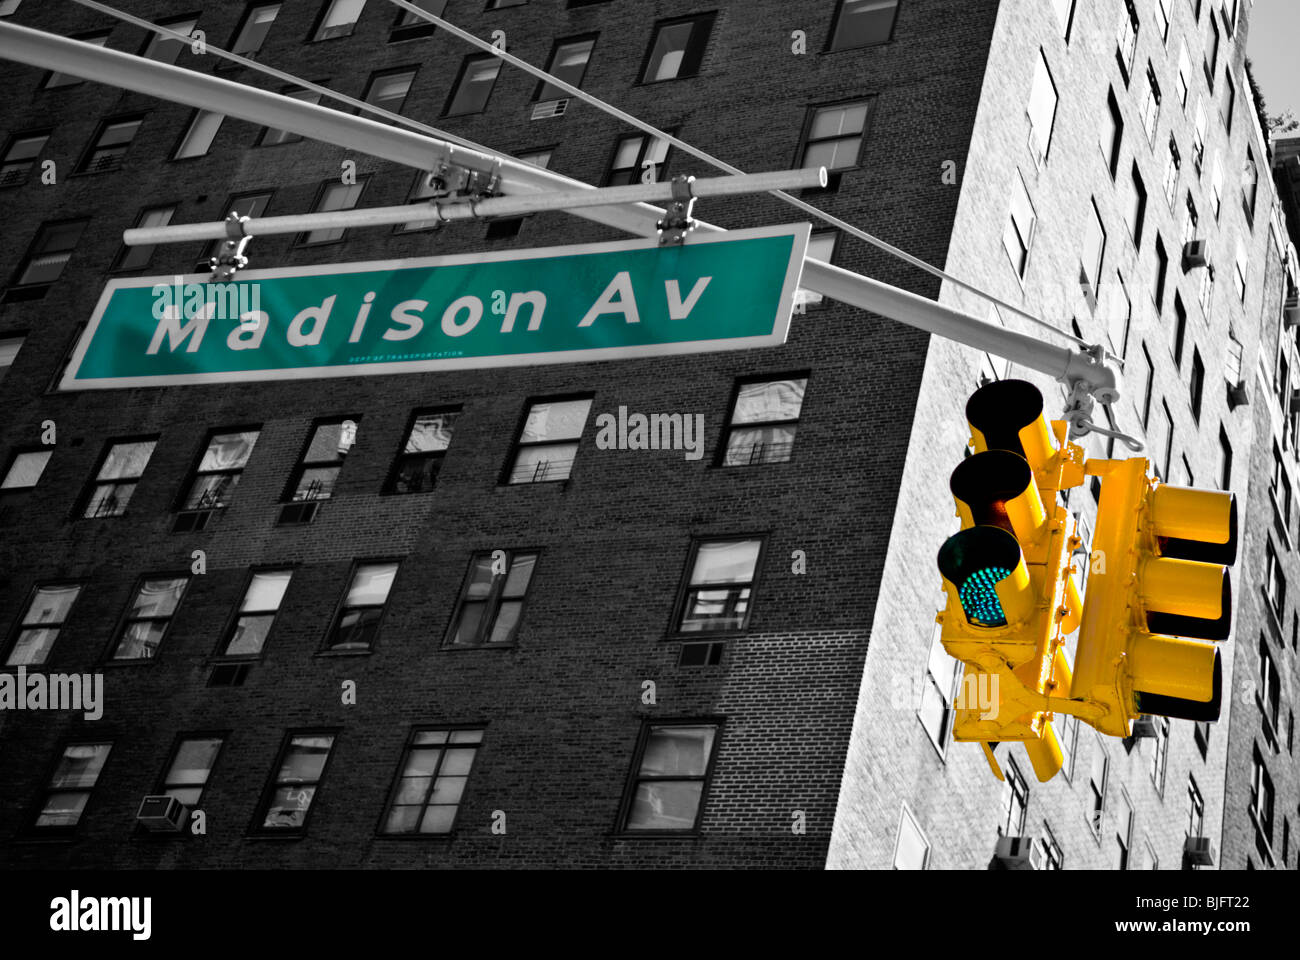 Madison Avenue Street Sign and Traffic Light in Spot Colours -Manhattan - New York City - USA Stock Photo